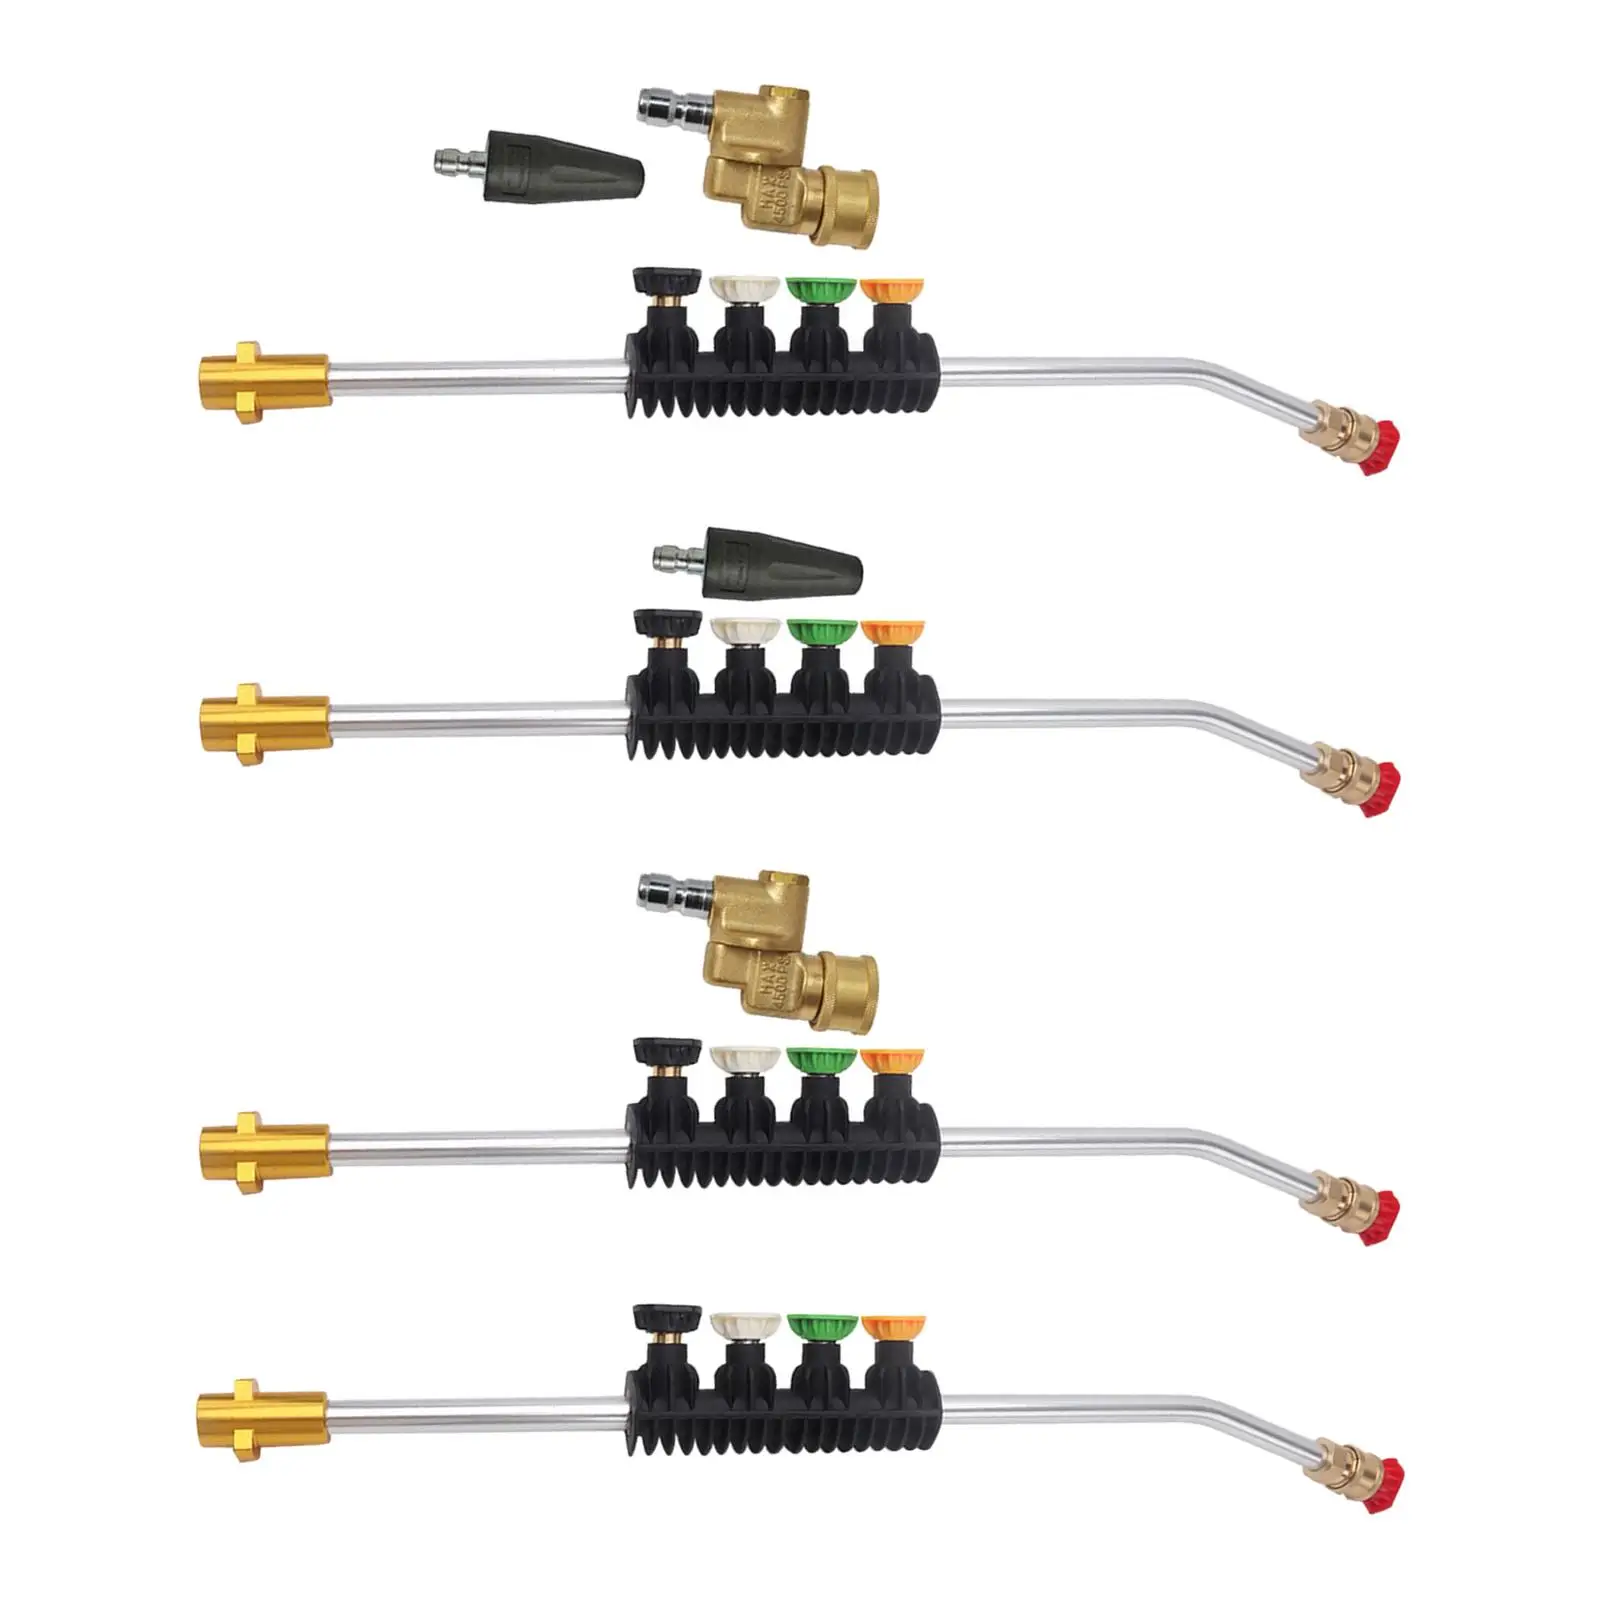 Metal Jet Lance with Nozzle Tips 2600 PSI Parts Pressure Washers Fittings Quick Connect for K Series